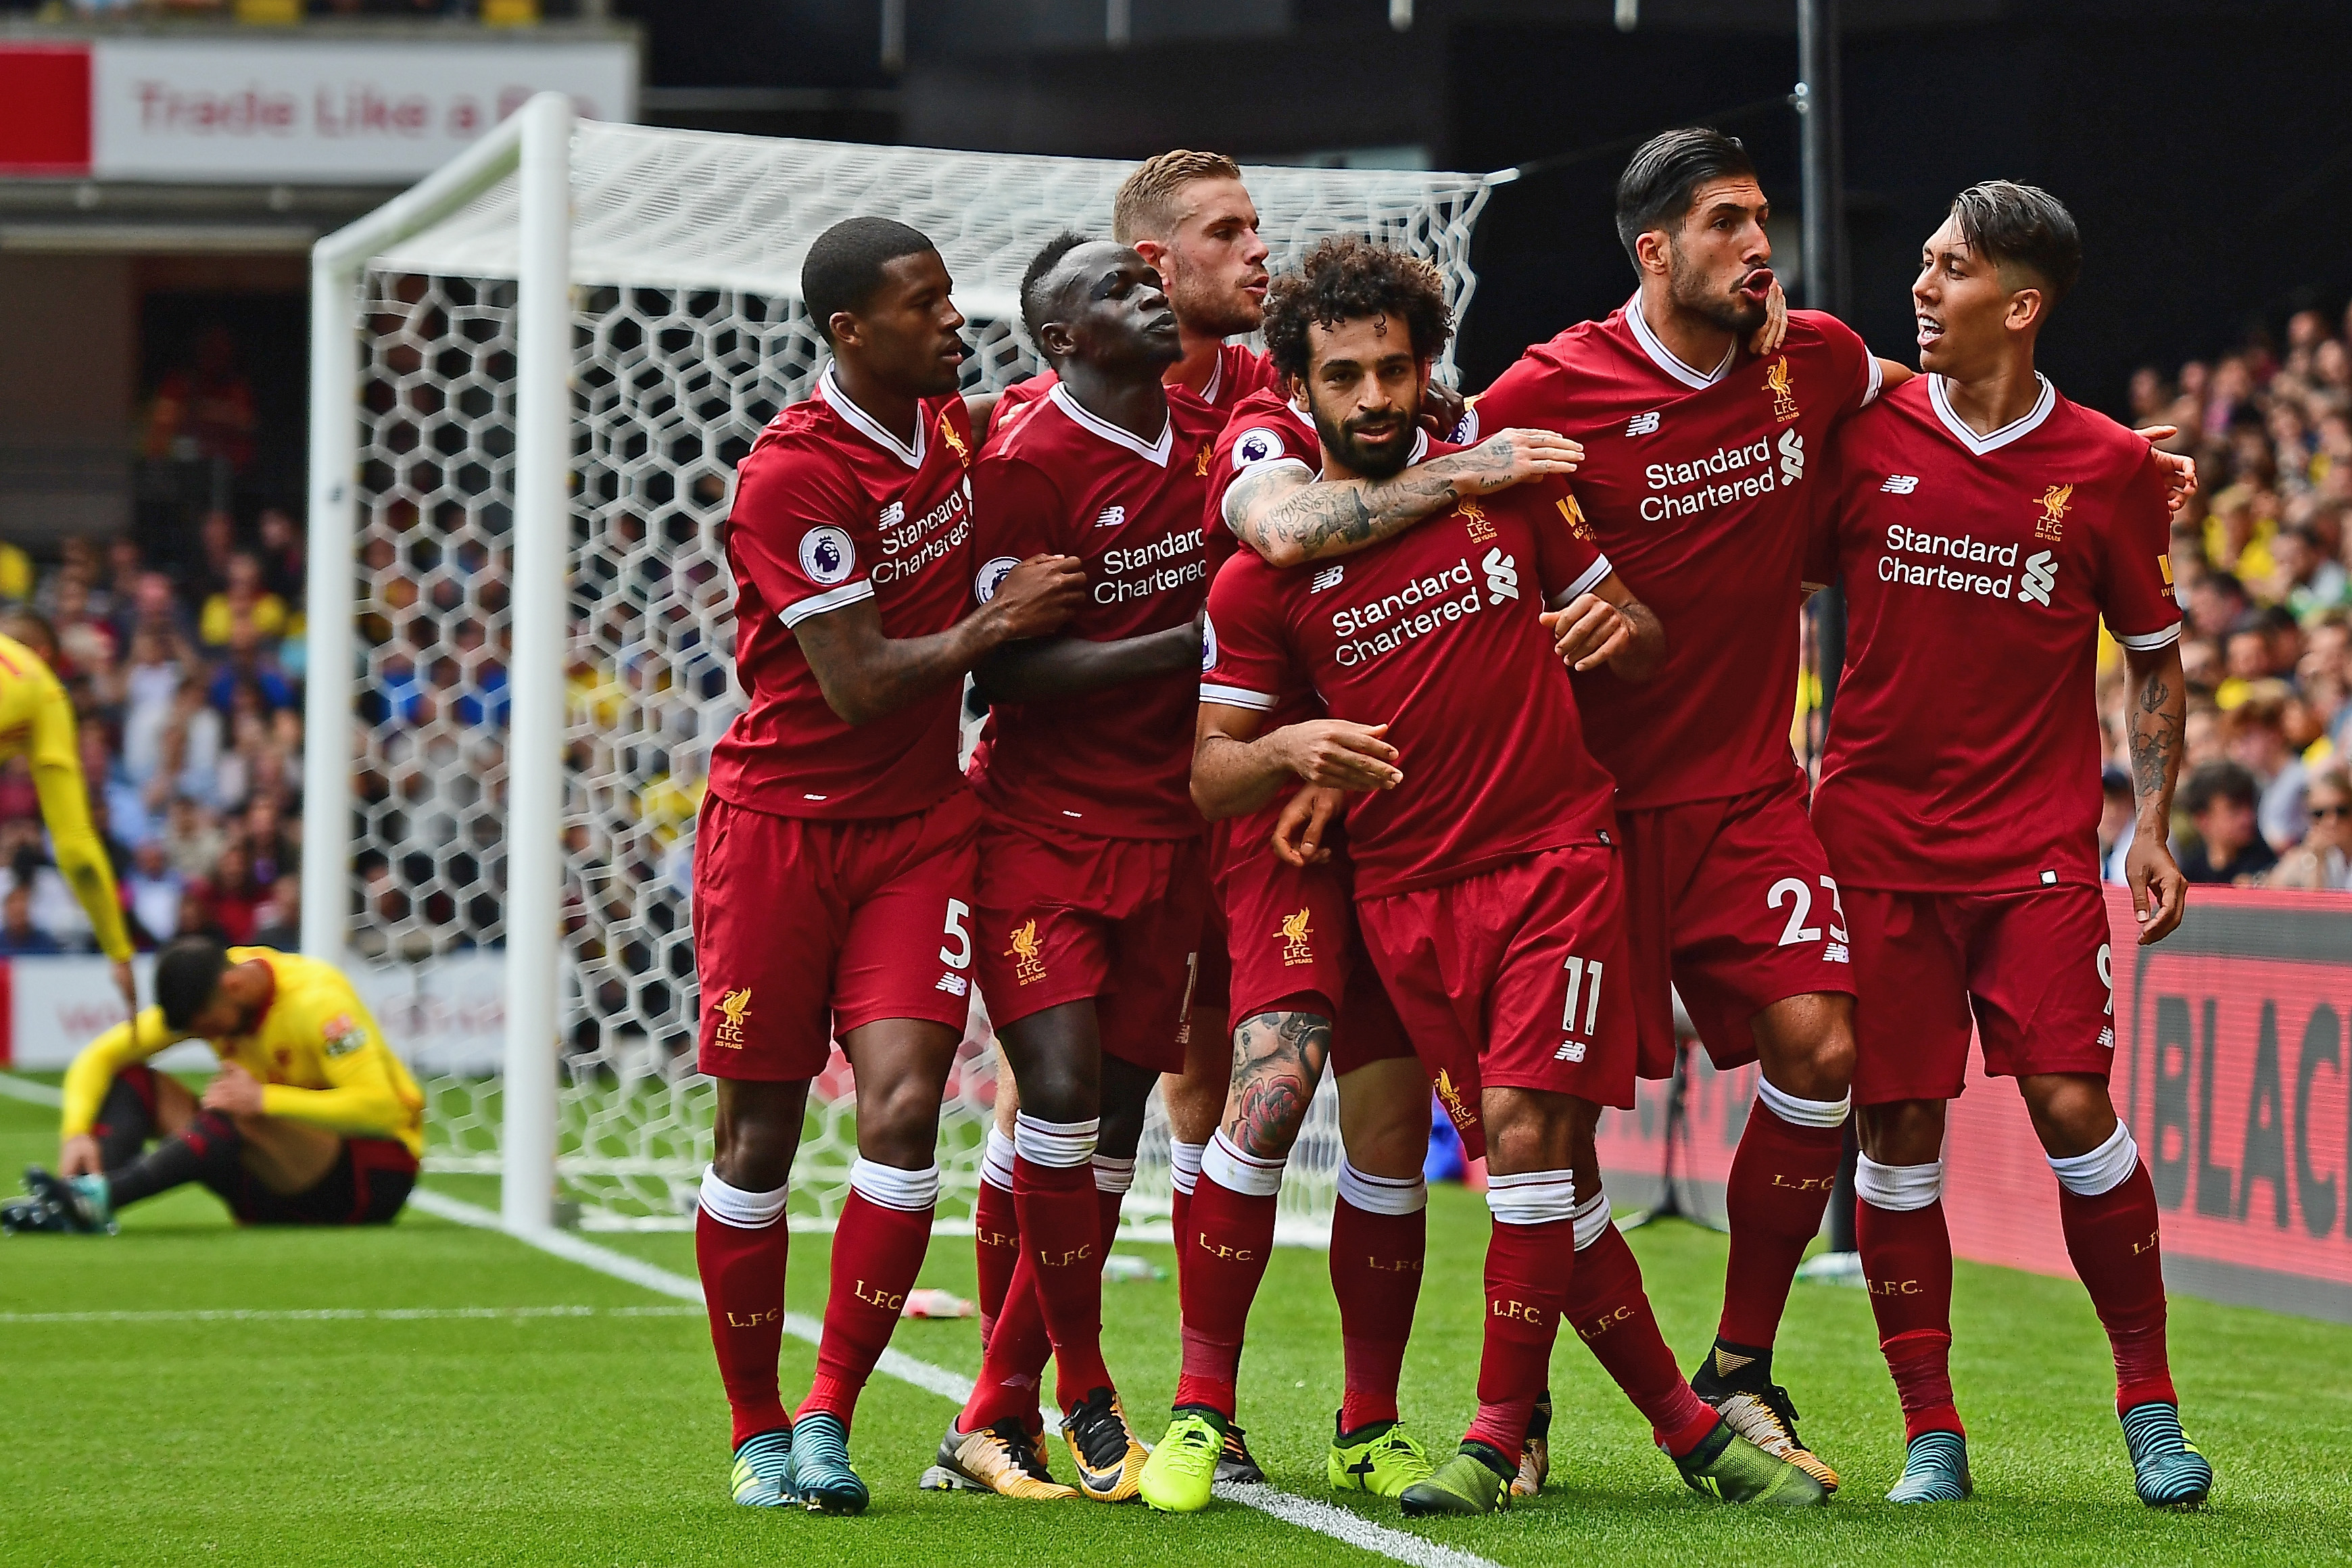 WATFORD, ENGLAND - AUGUST 12: Mohamed Salah of Liverpool celebrates scoring his sides third goal with his Liverpool team mates during the Premier League match between Watford and Liverpool at Vicarage Road on August 12, 2017 in Watford, England.  (Photo by Alex Broadway/Getty Images)